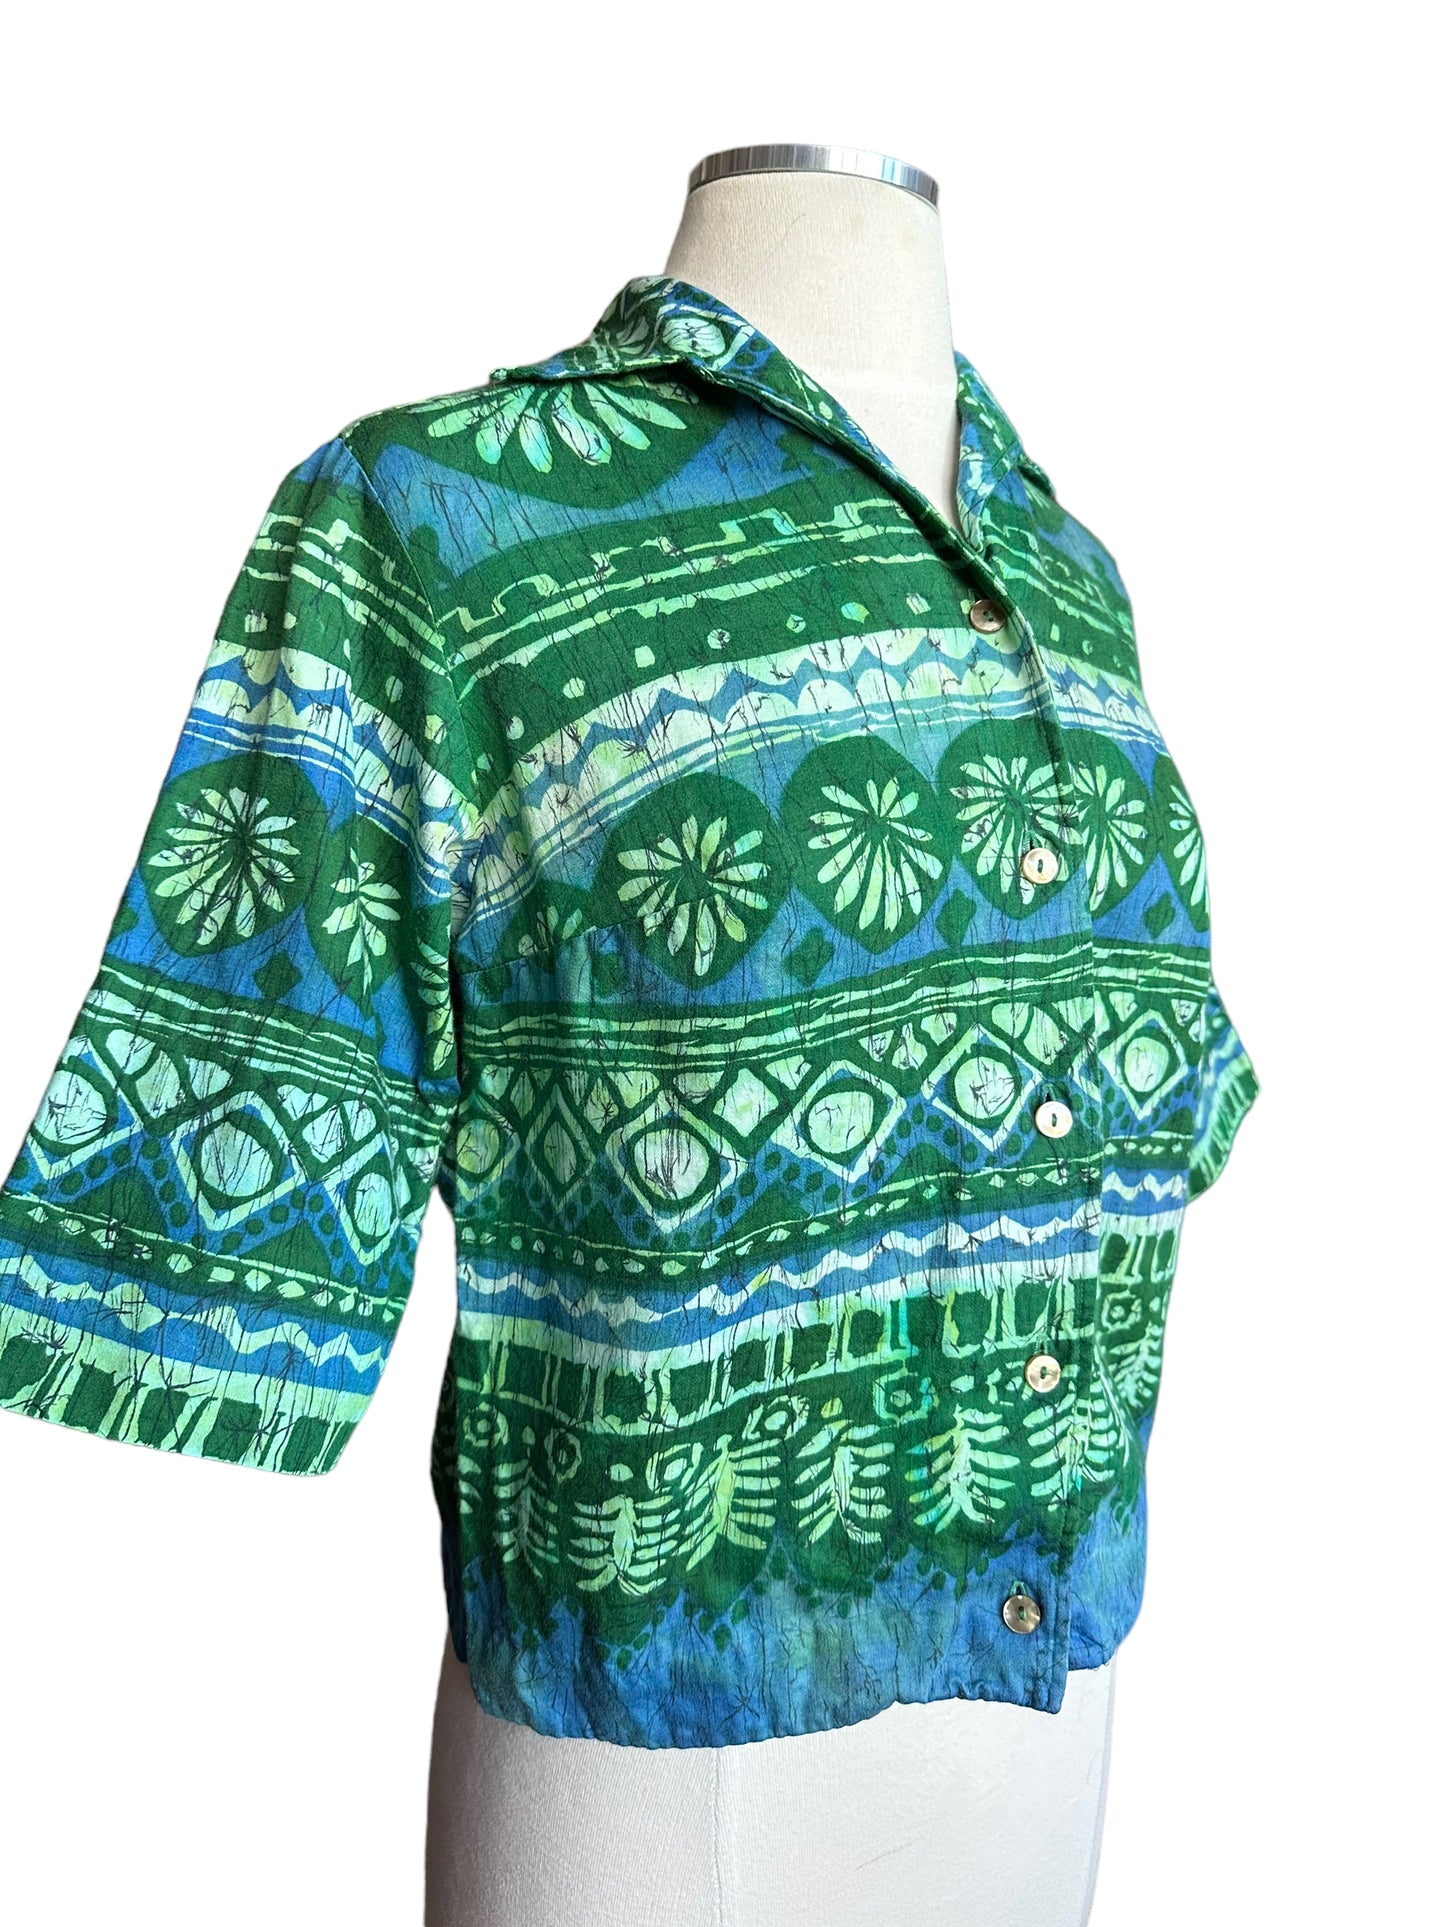 Right side front view of Vintage 1950s Batik Style Shirt | Seattle Vintage Ladies Clothing | Barn Owl True Vintage